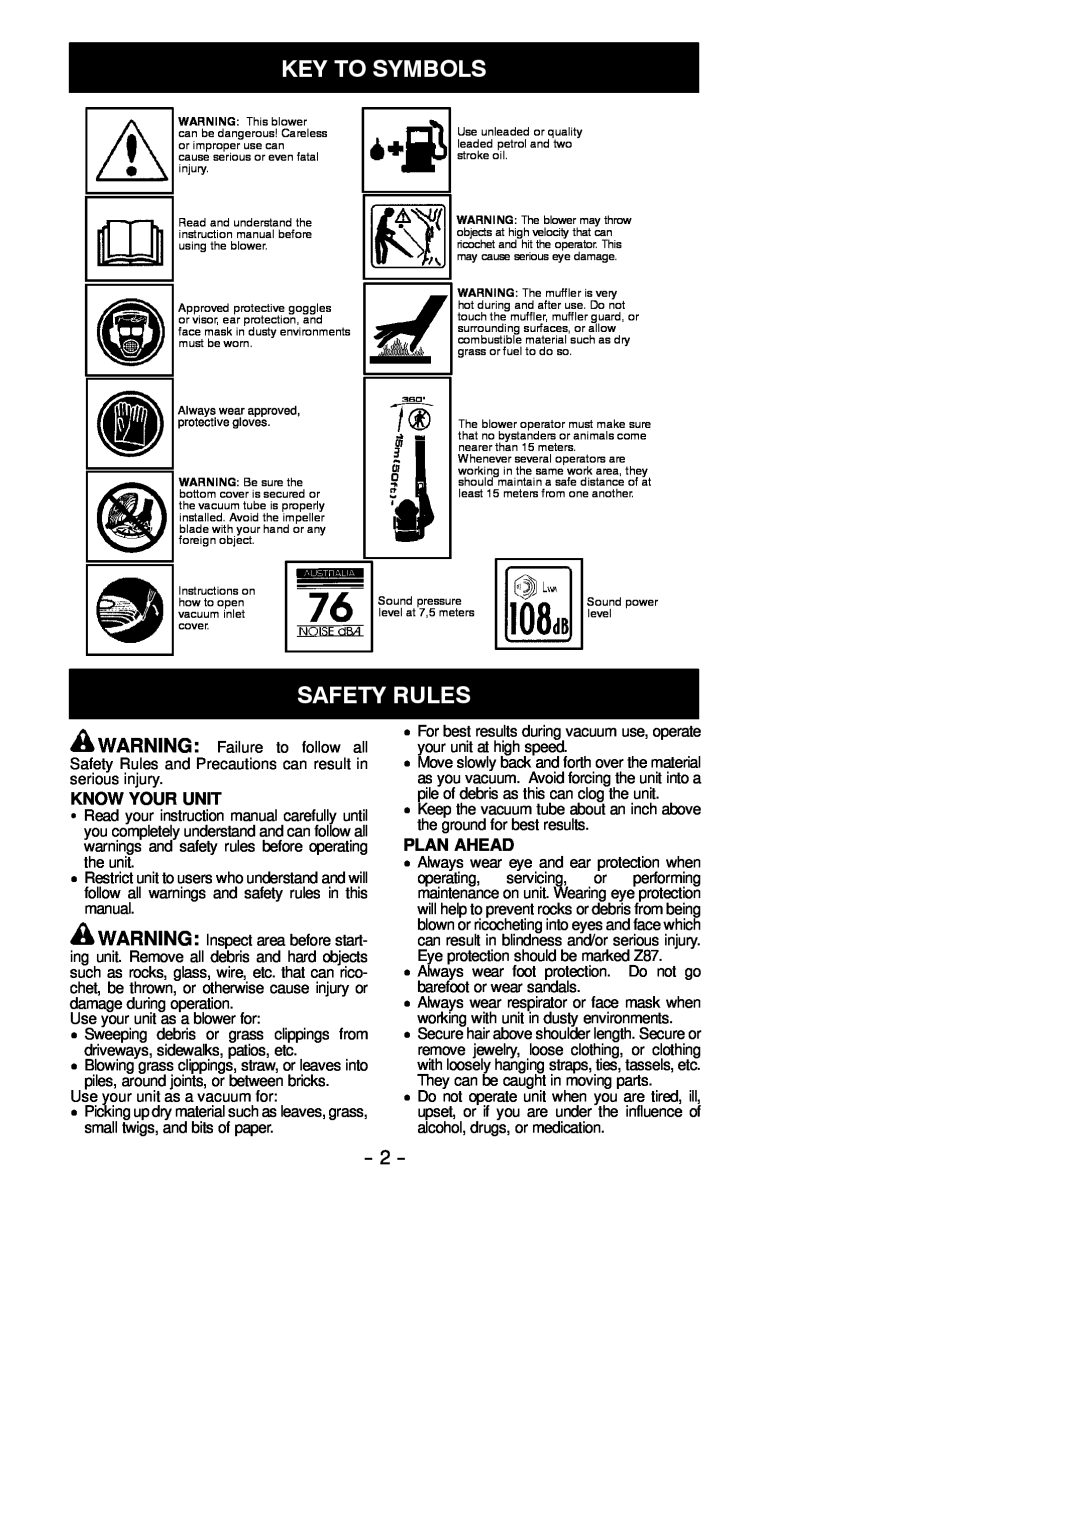 McCulloch MAC GBV 345 instruction manual Key To Symbols, Safety Rules, Know Your Unit, Plan Ahead 